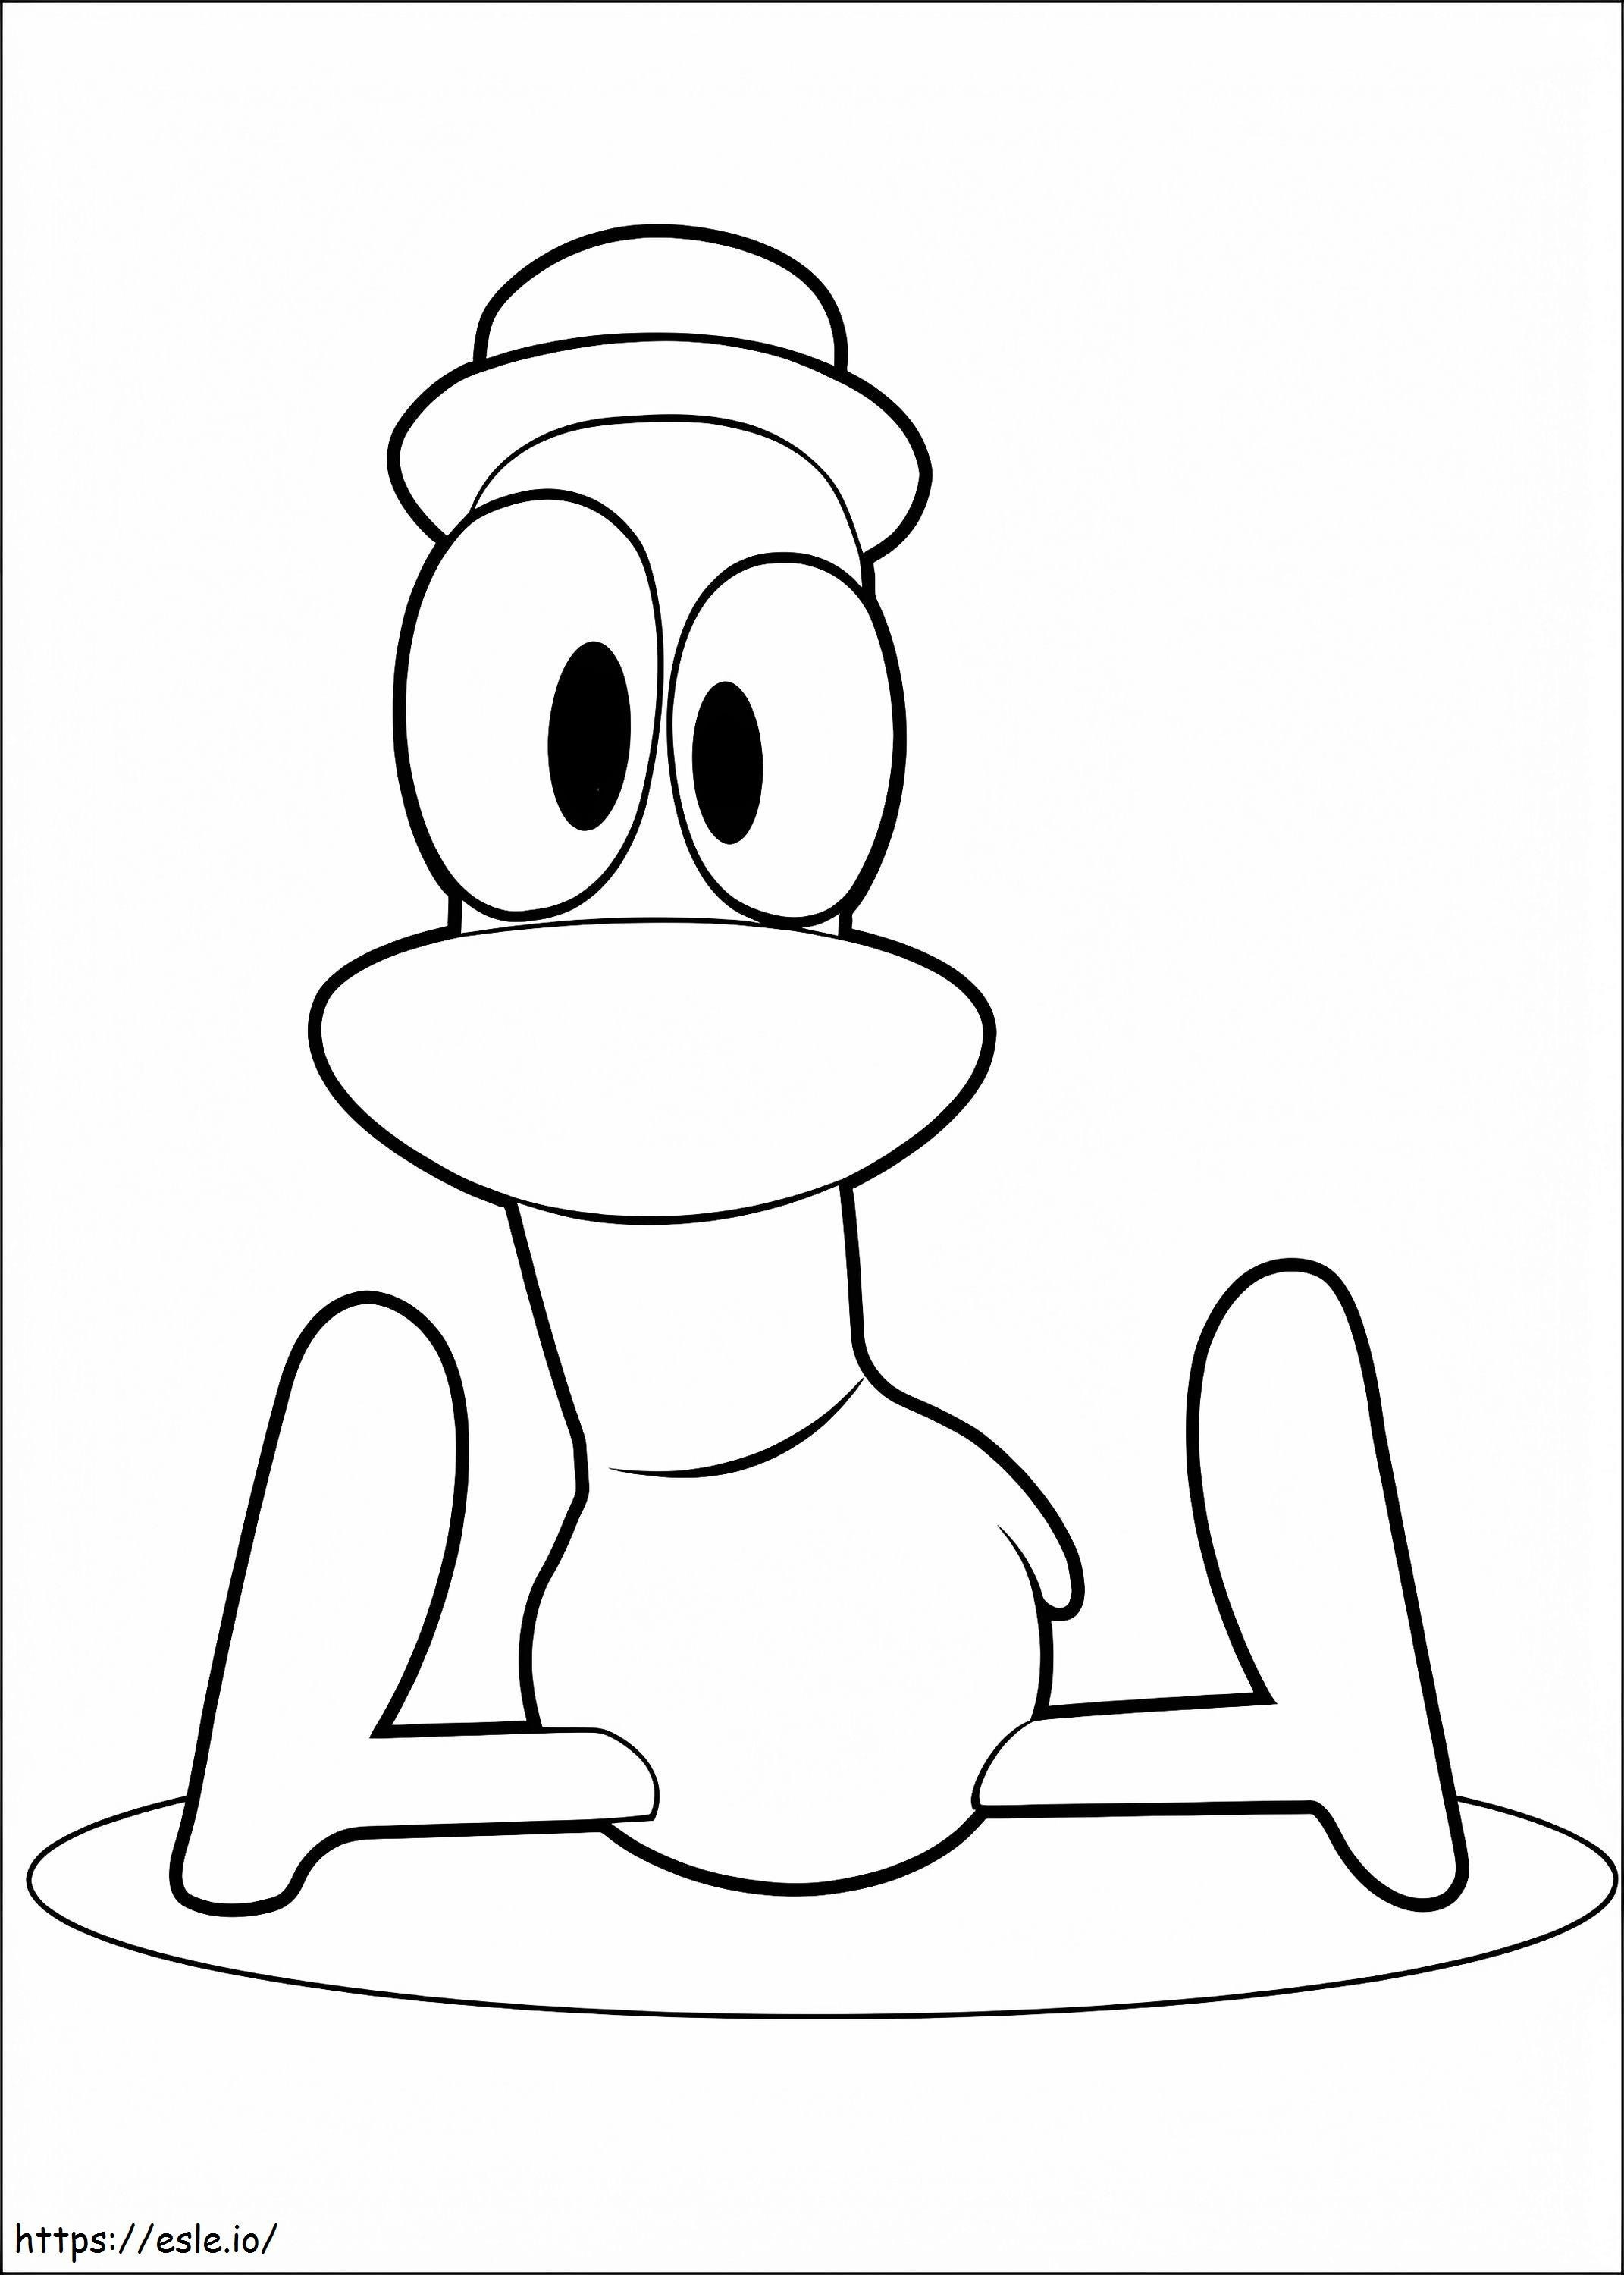 Pato Duck From Pocoyo coloring page